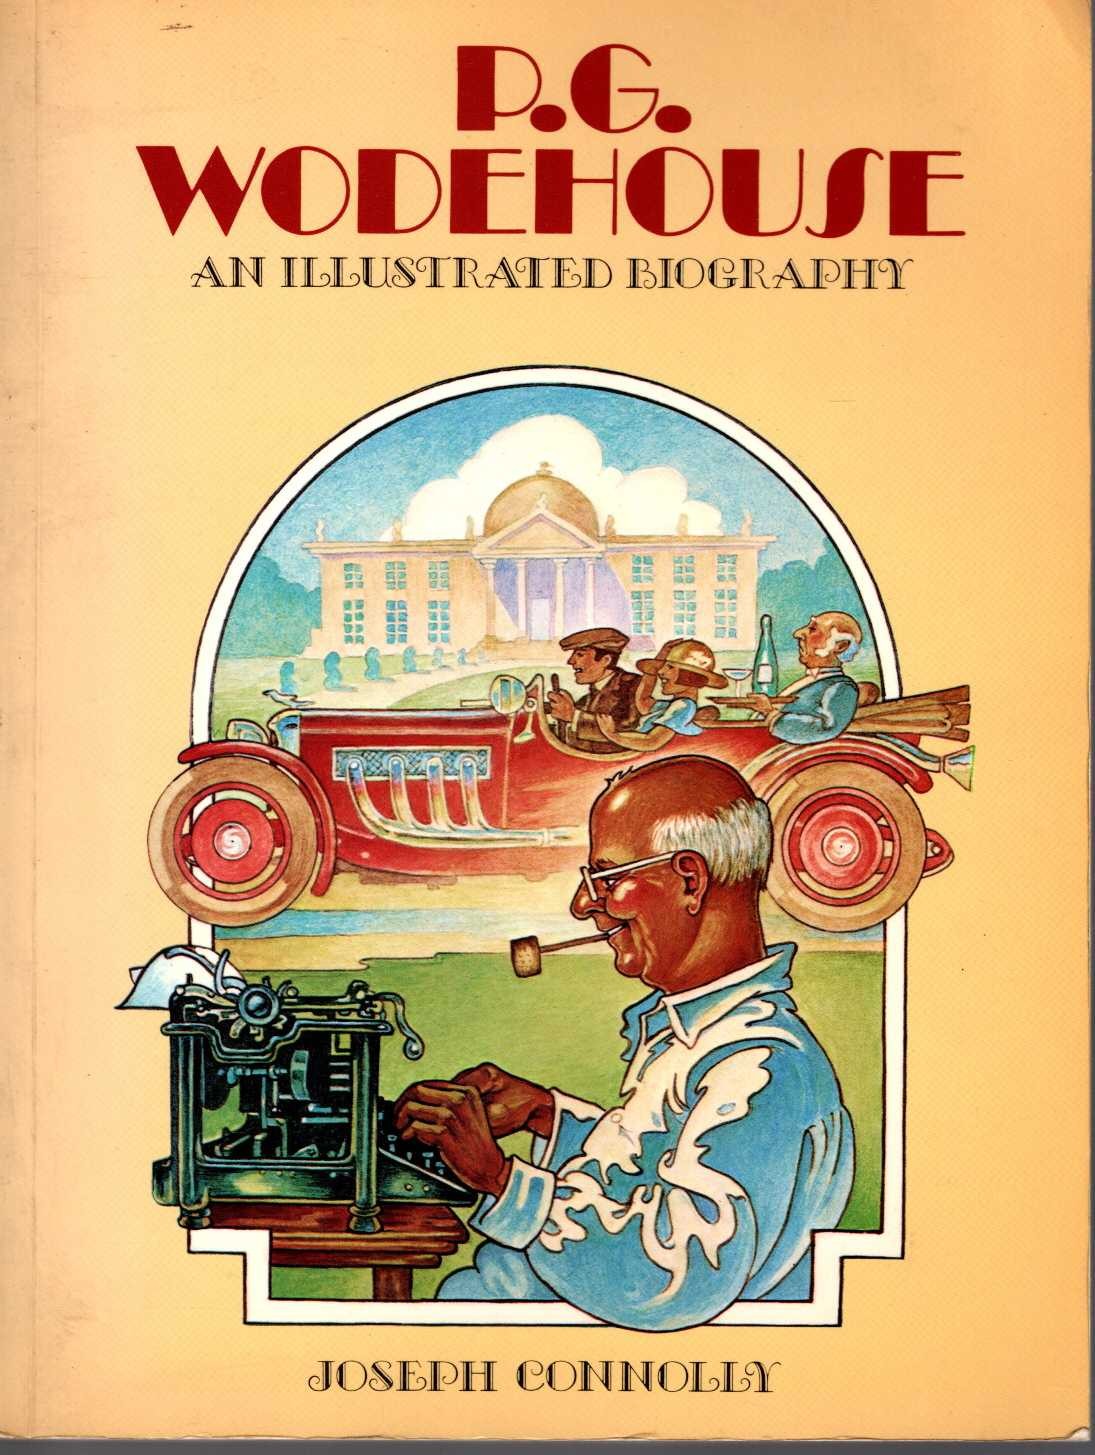 (Joseph Connolly) P.G.WODEHOUSE. An Illustrated Biography front book cover image